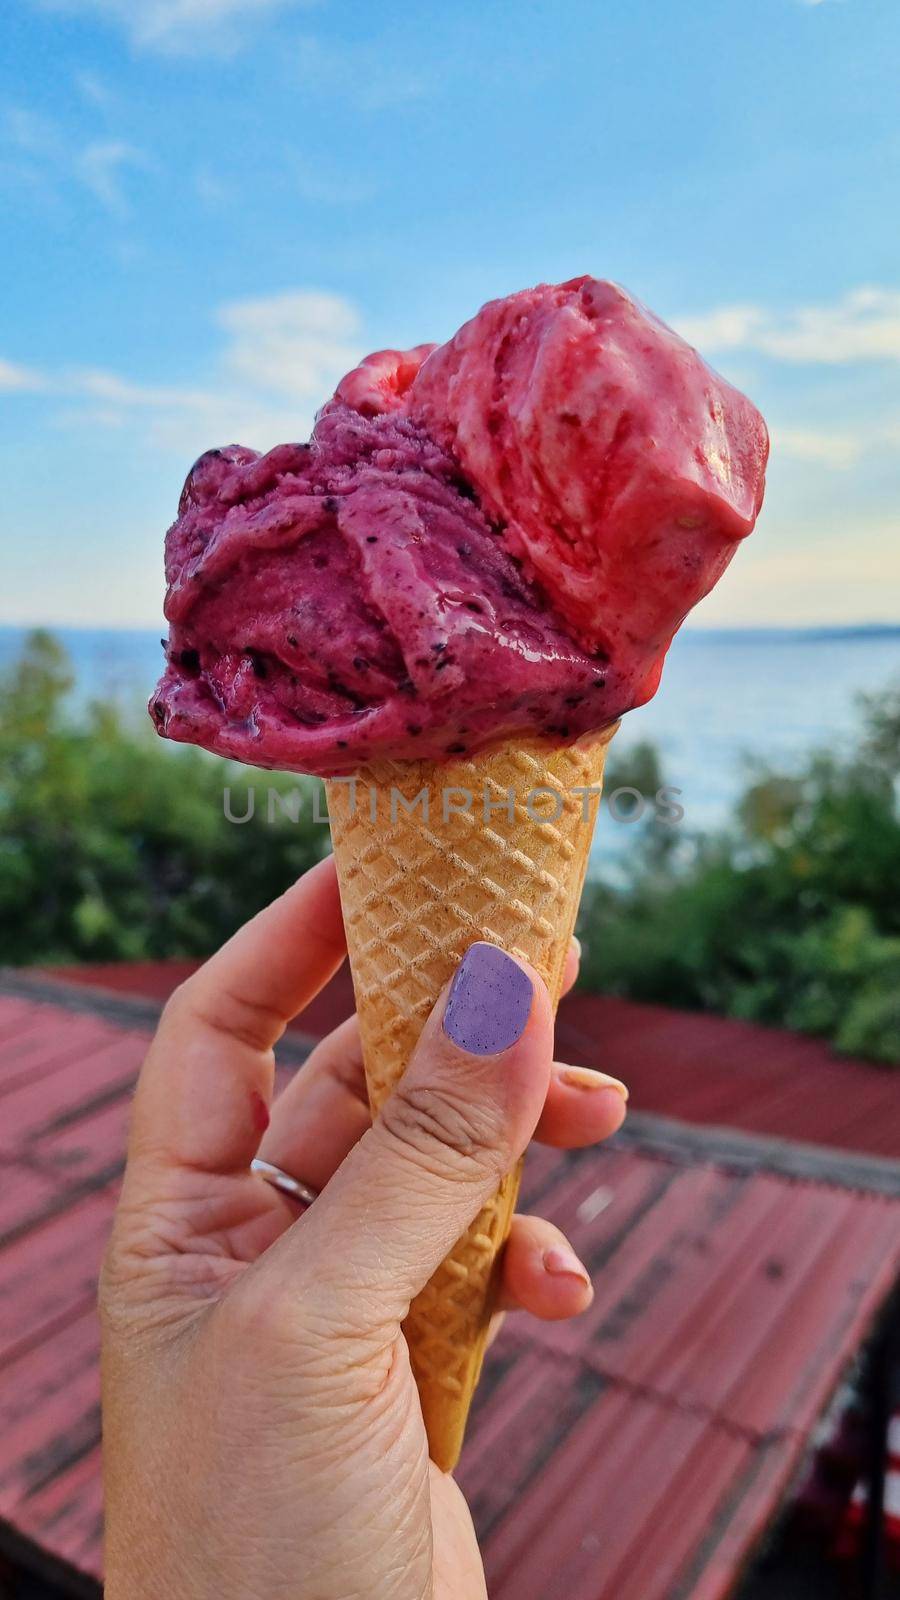 Gelato ice cream cone held up to the hot summer city by anytka